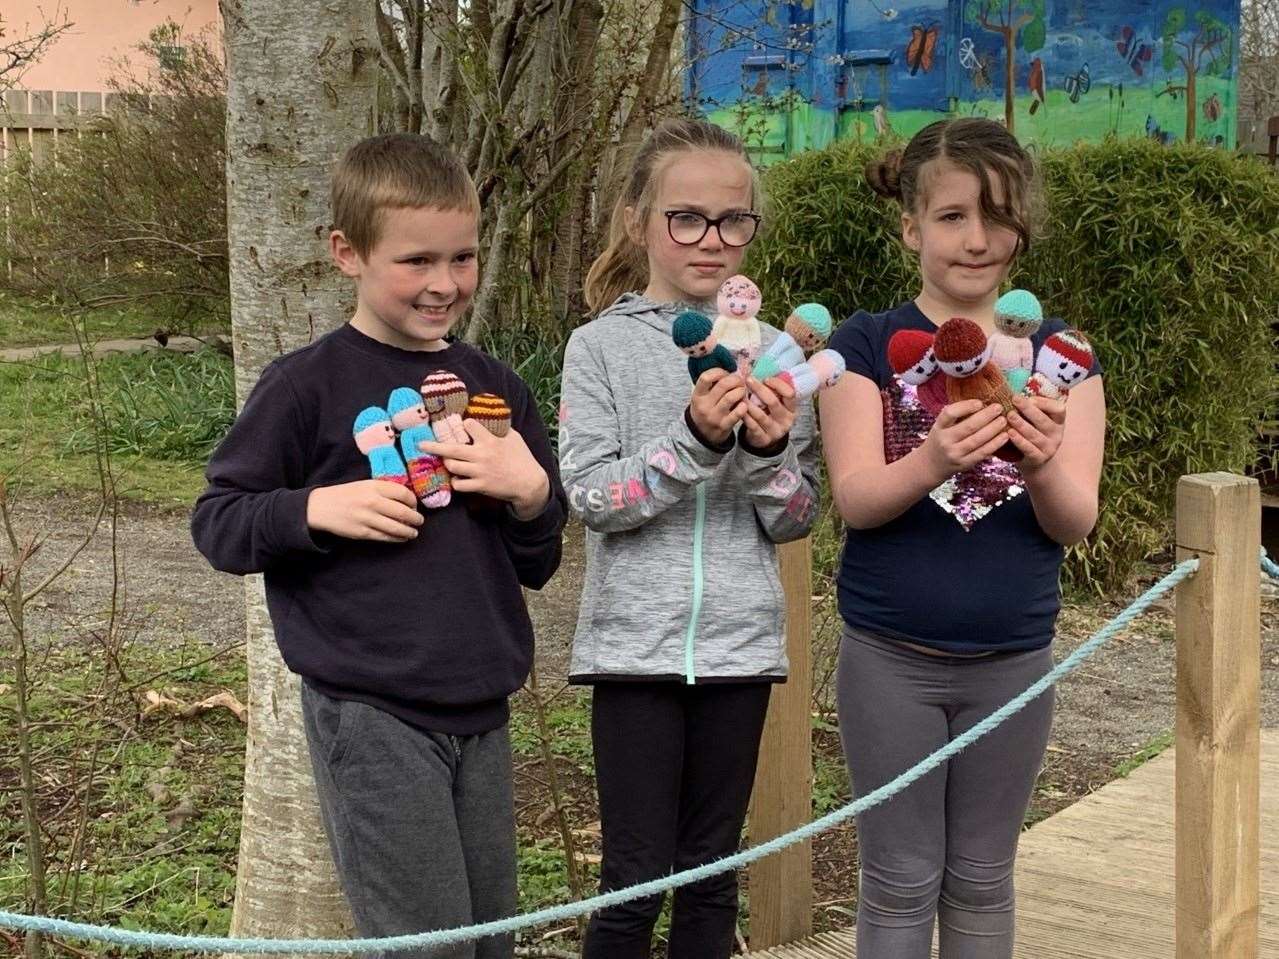 Strathburn School pupils with some of the hand-knitted worry dolls.